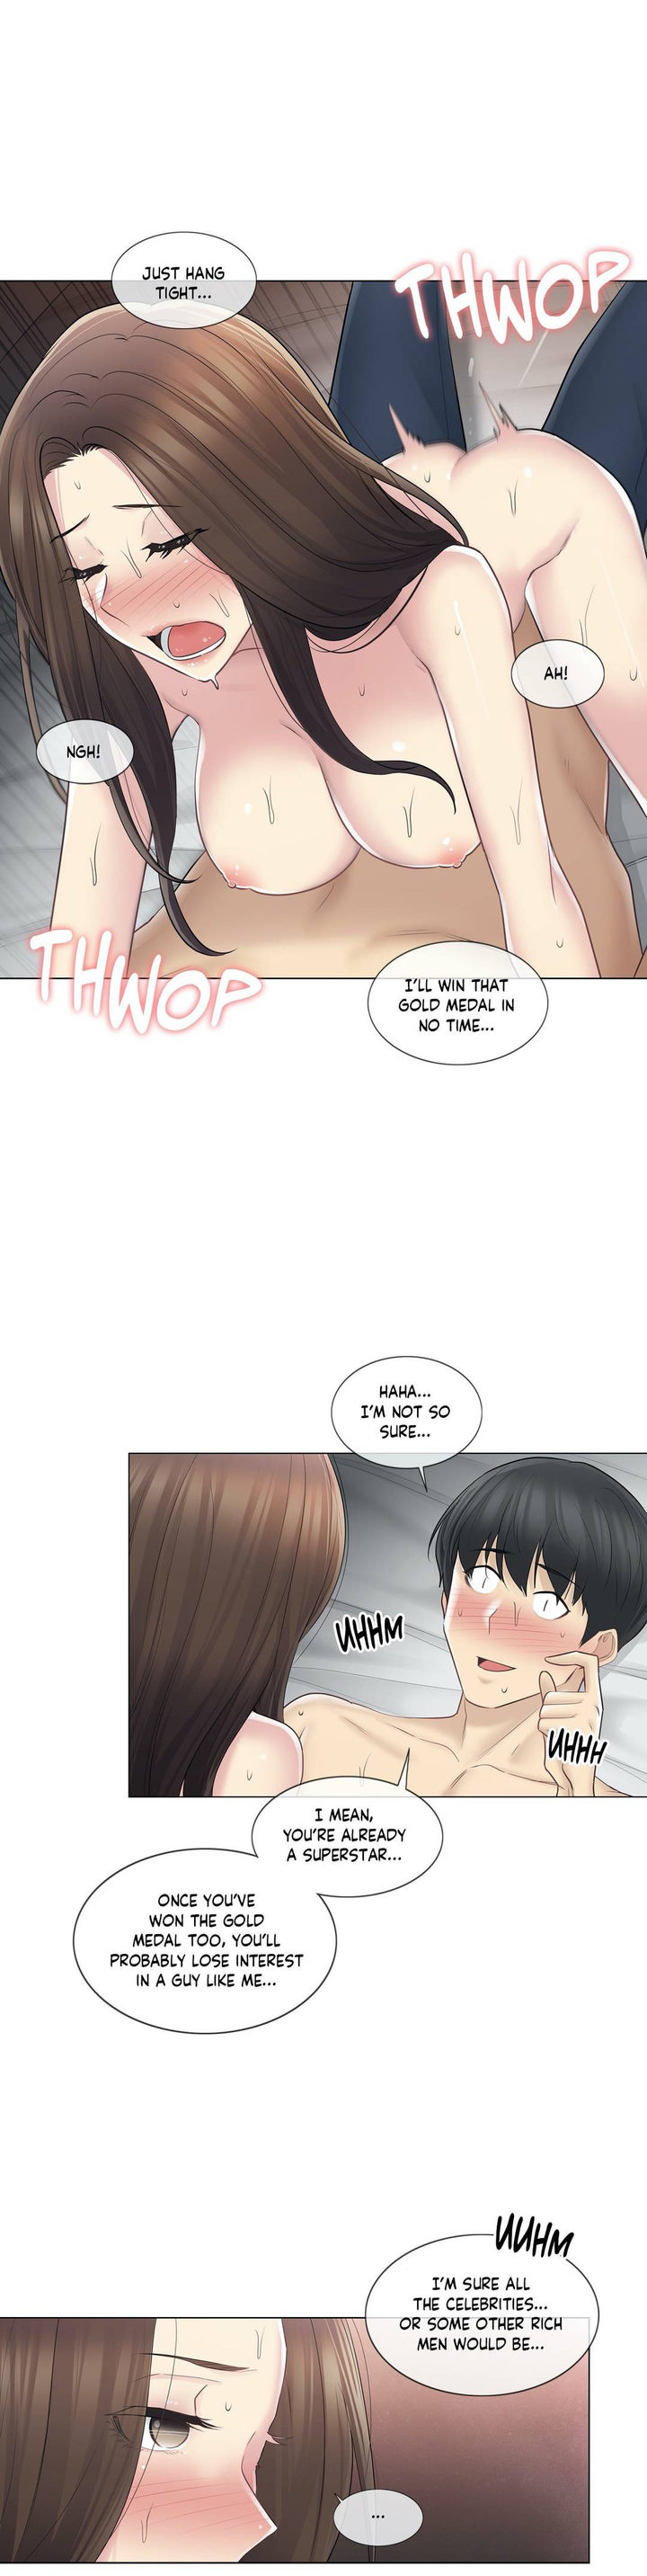 Read Manhwa touch-to-unlock, Read Manga touch-to-unlock Online